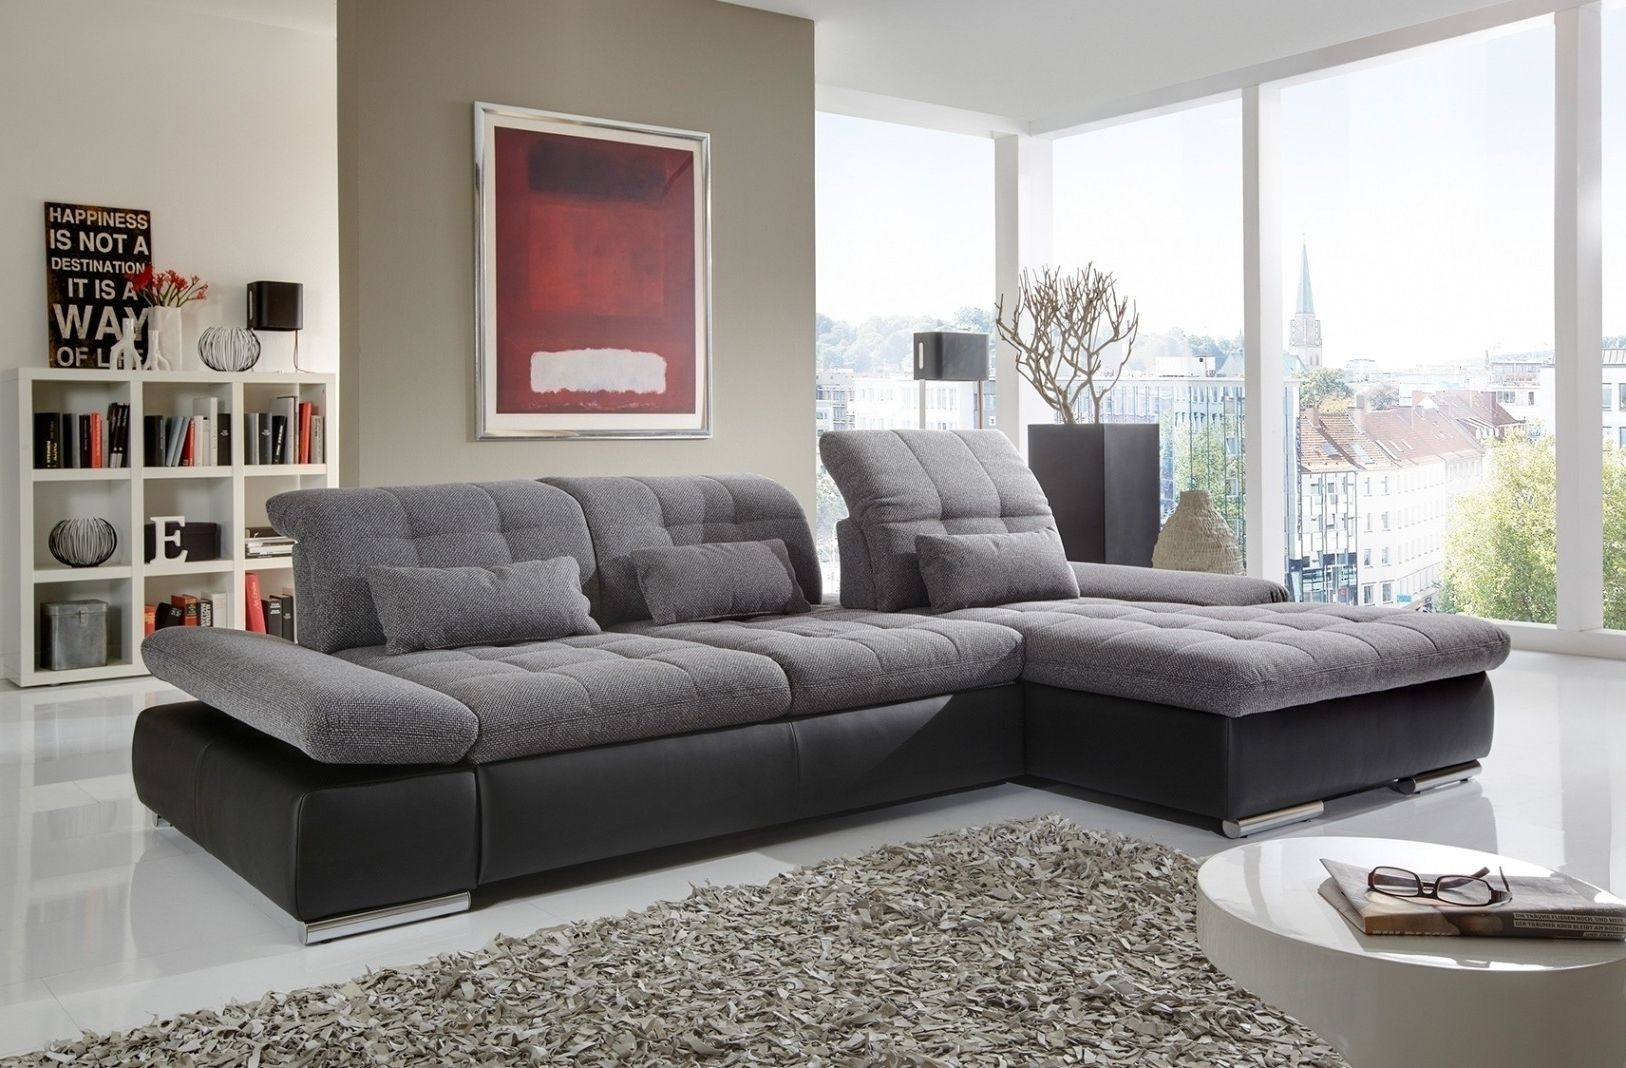 Top 20 Of Trinidad And Tobago Sectional Sofas Within Trinidad And Tobago Sectional Sofas (View 3 of 10)